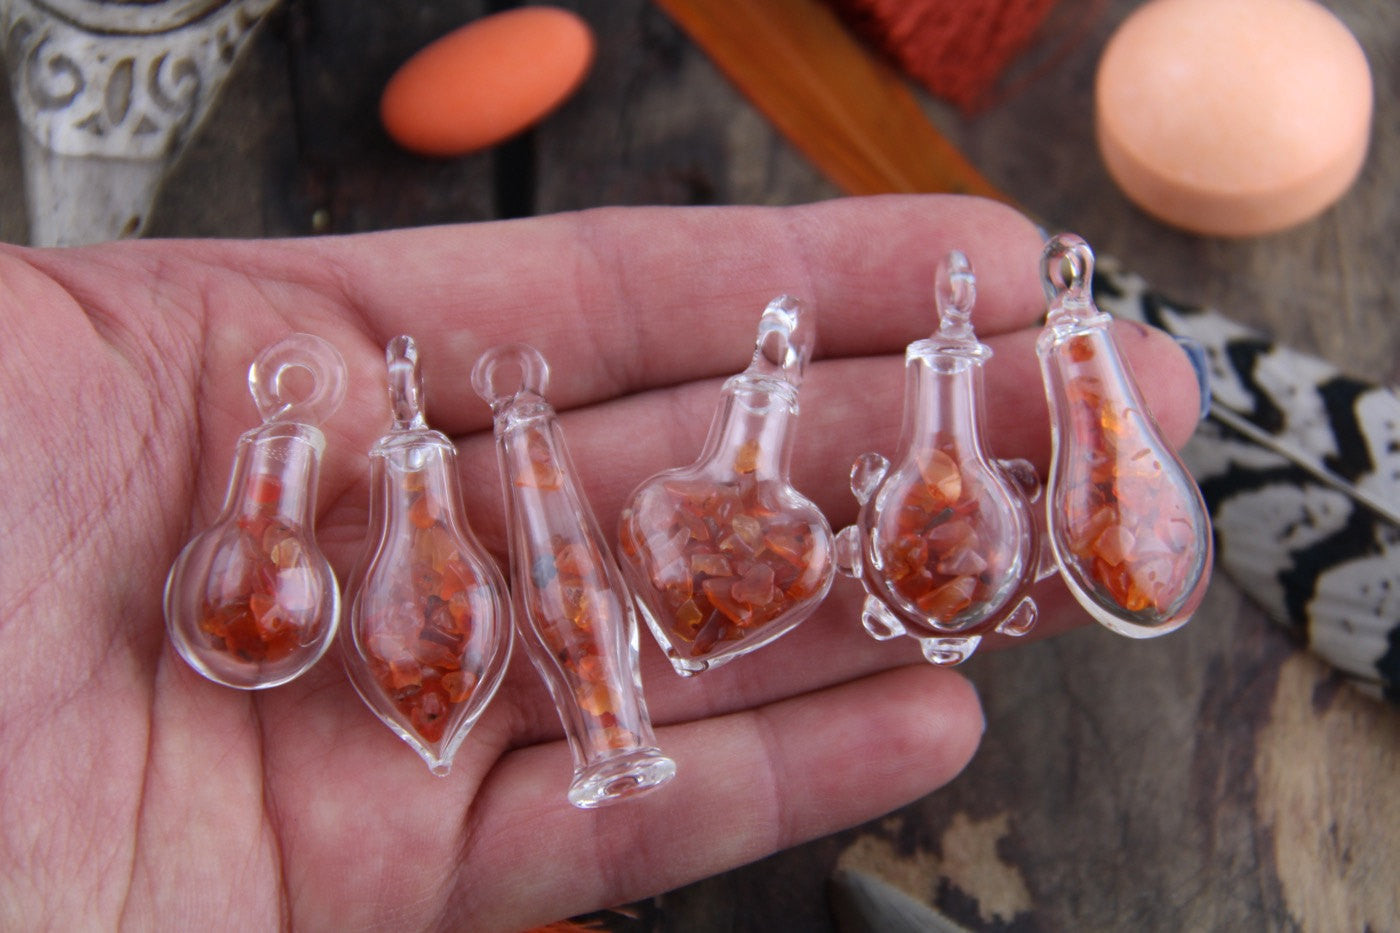 Carnelian Magic: Tiny Glass Bottle Pendant with Carnelian Chips, Charm with Gemstone Chips, Bohemian Jewelry Making Supply, Gift for Her - ShopWomanShopsWorld.com. Bone Beads, Tassels, Pom Poms, African Beads.